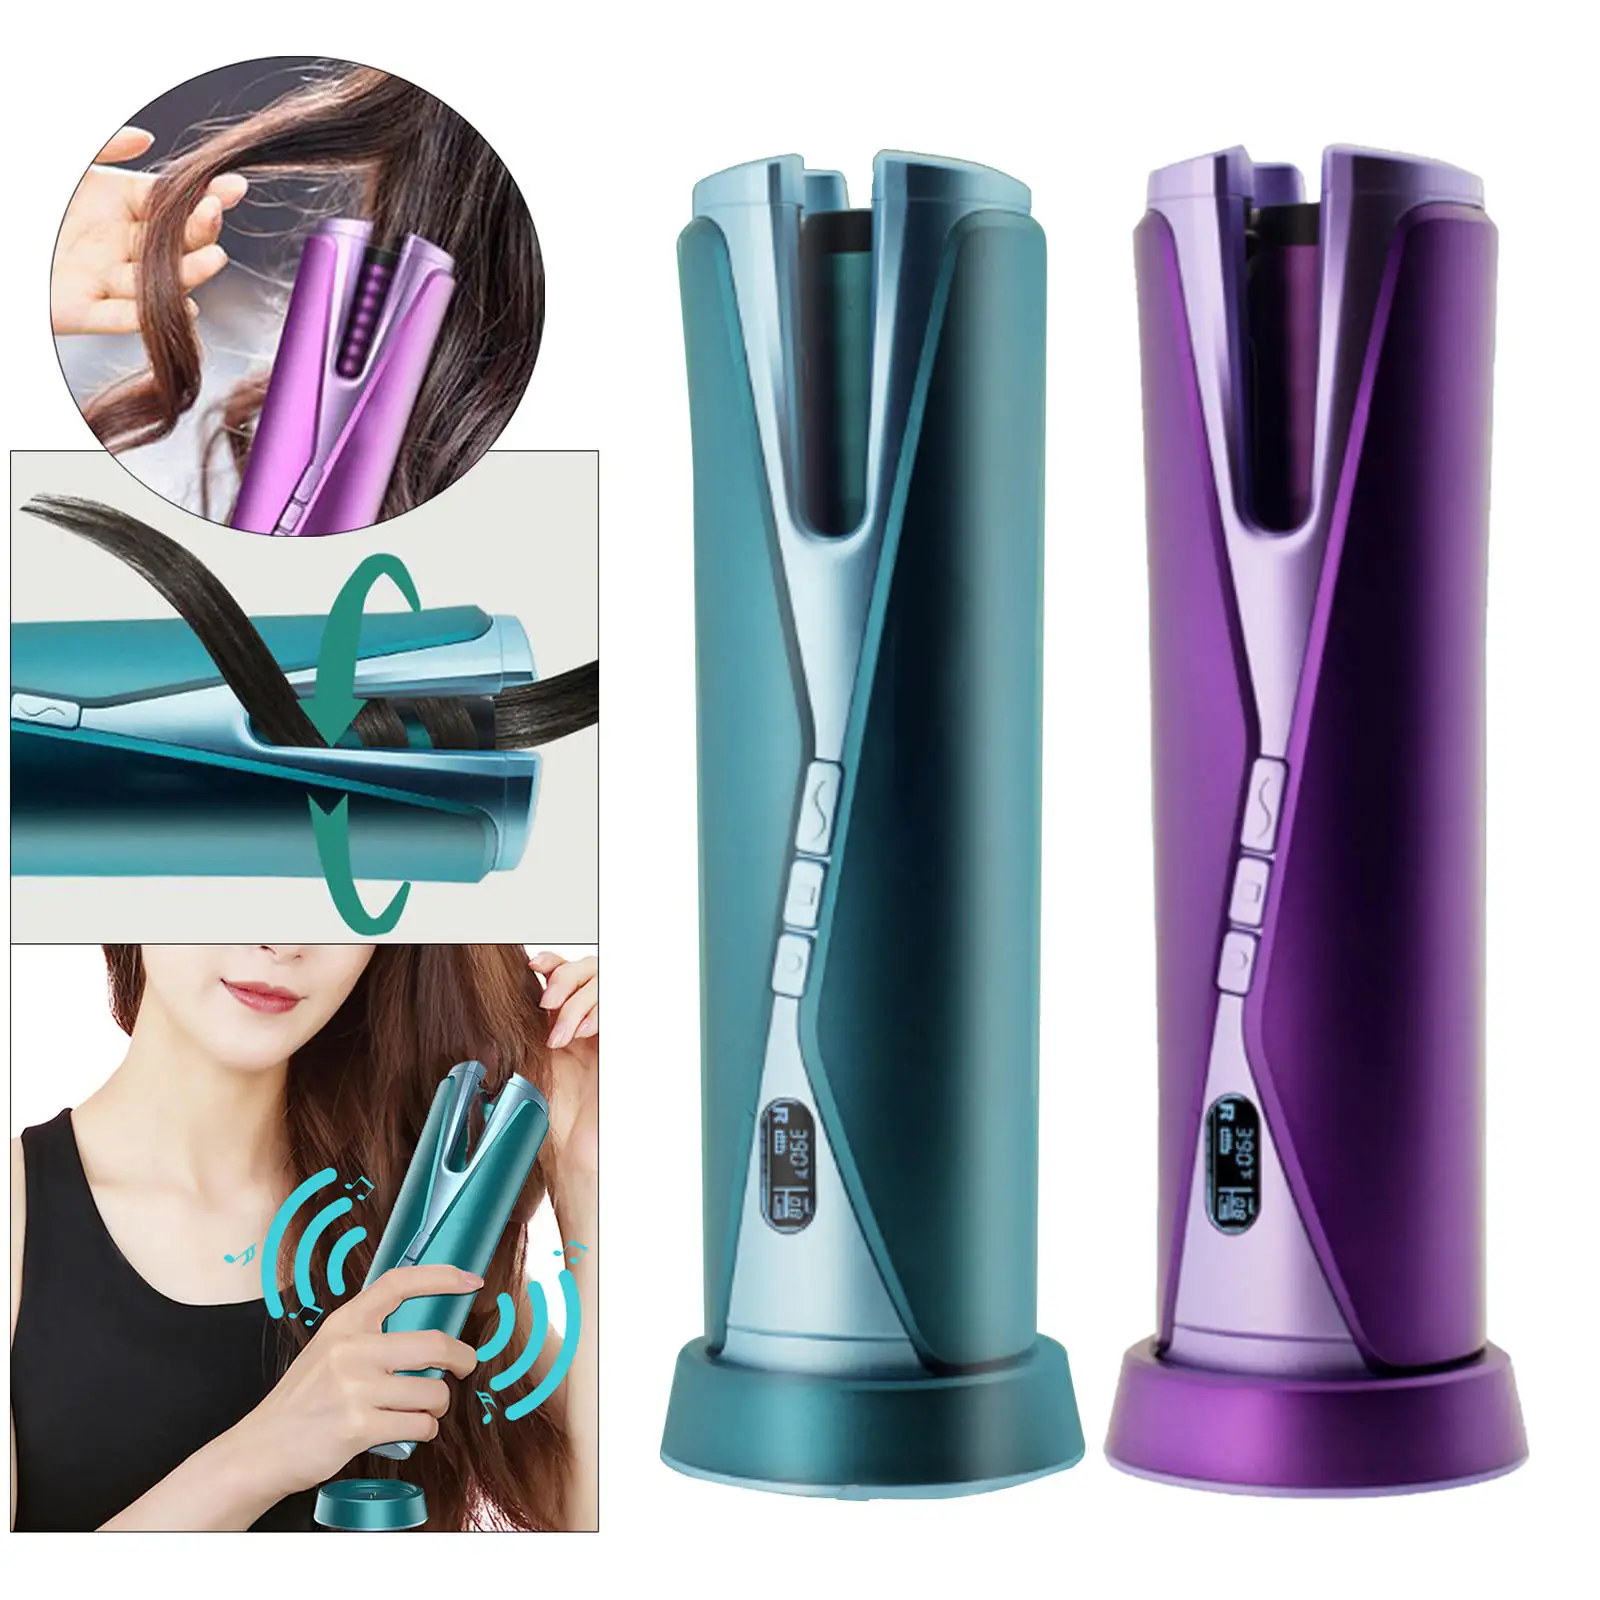 Portable Automatic Hair Rollers Curler with LCD Display Adjustable Music Curling Iron for Waver Styling